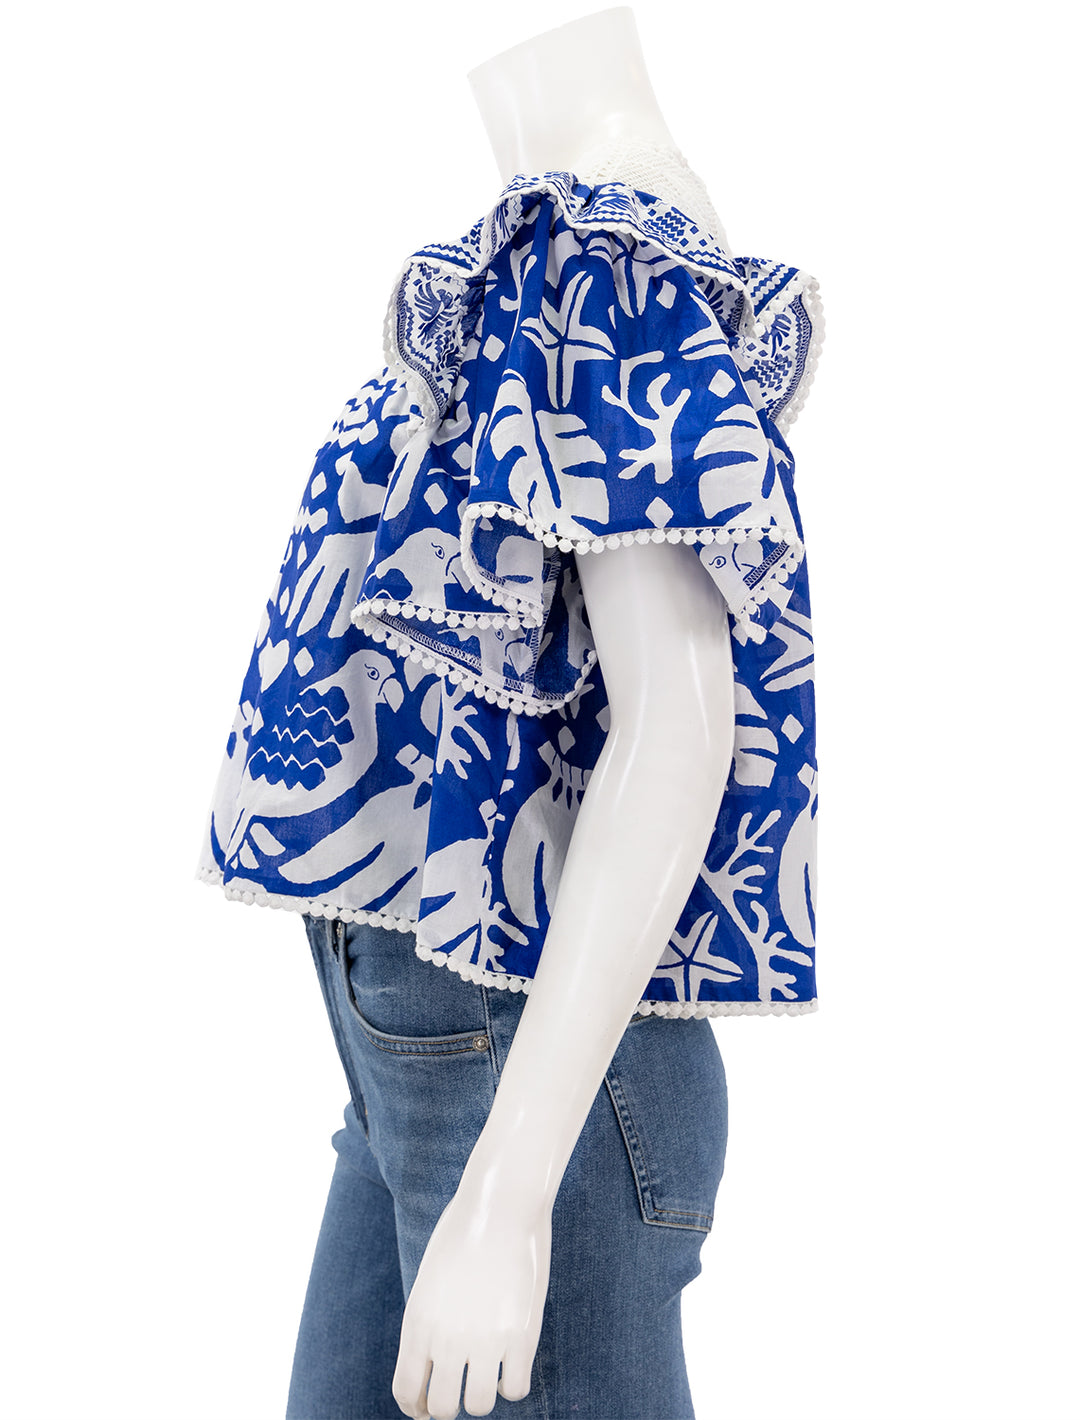 Side view of Farm Rio's jungles scarf blouse in navy blue.